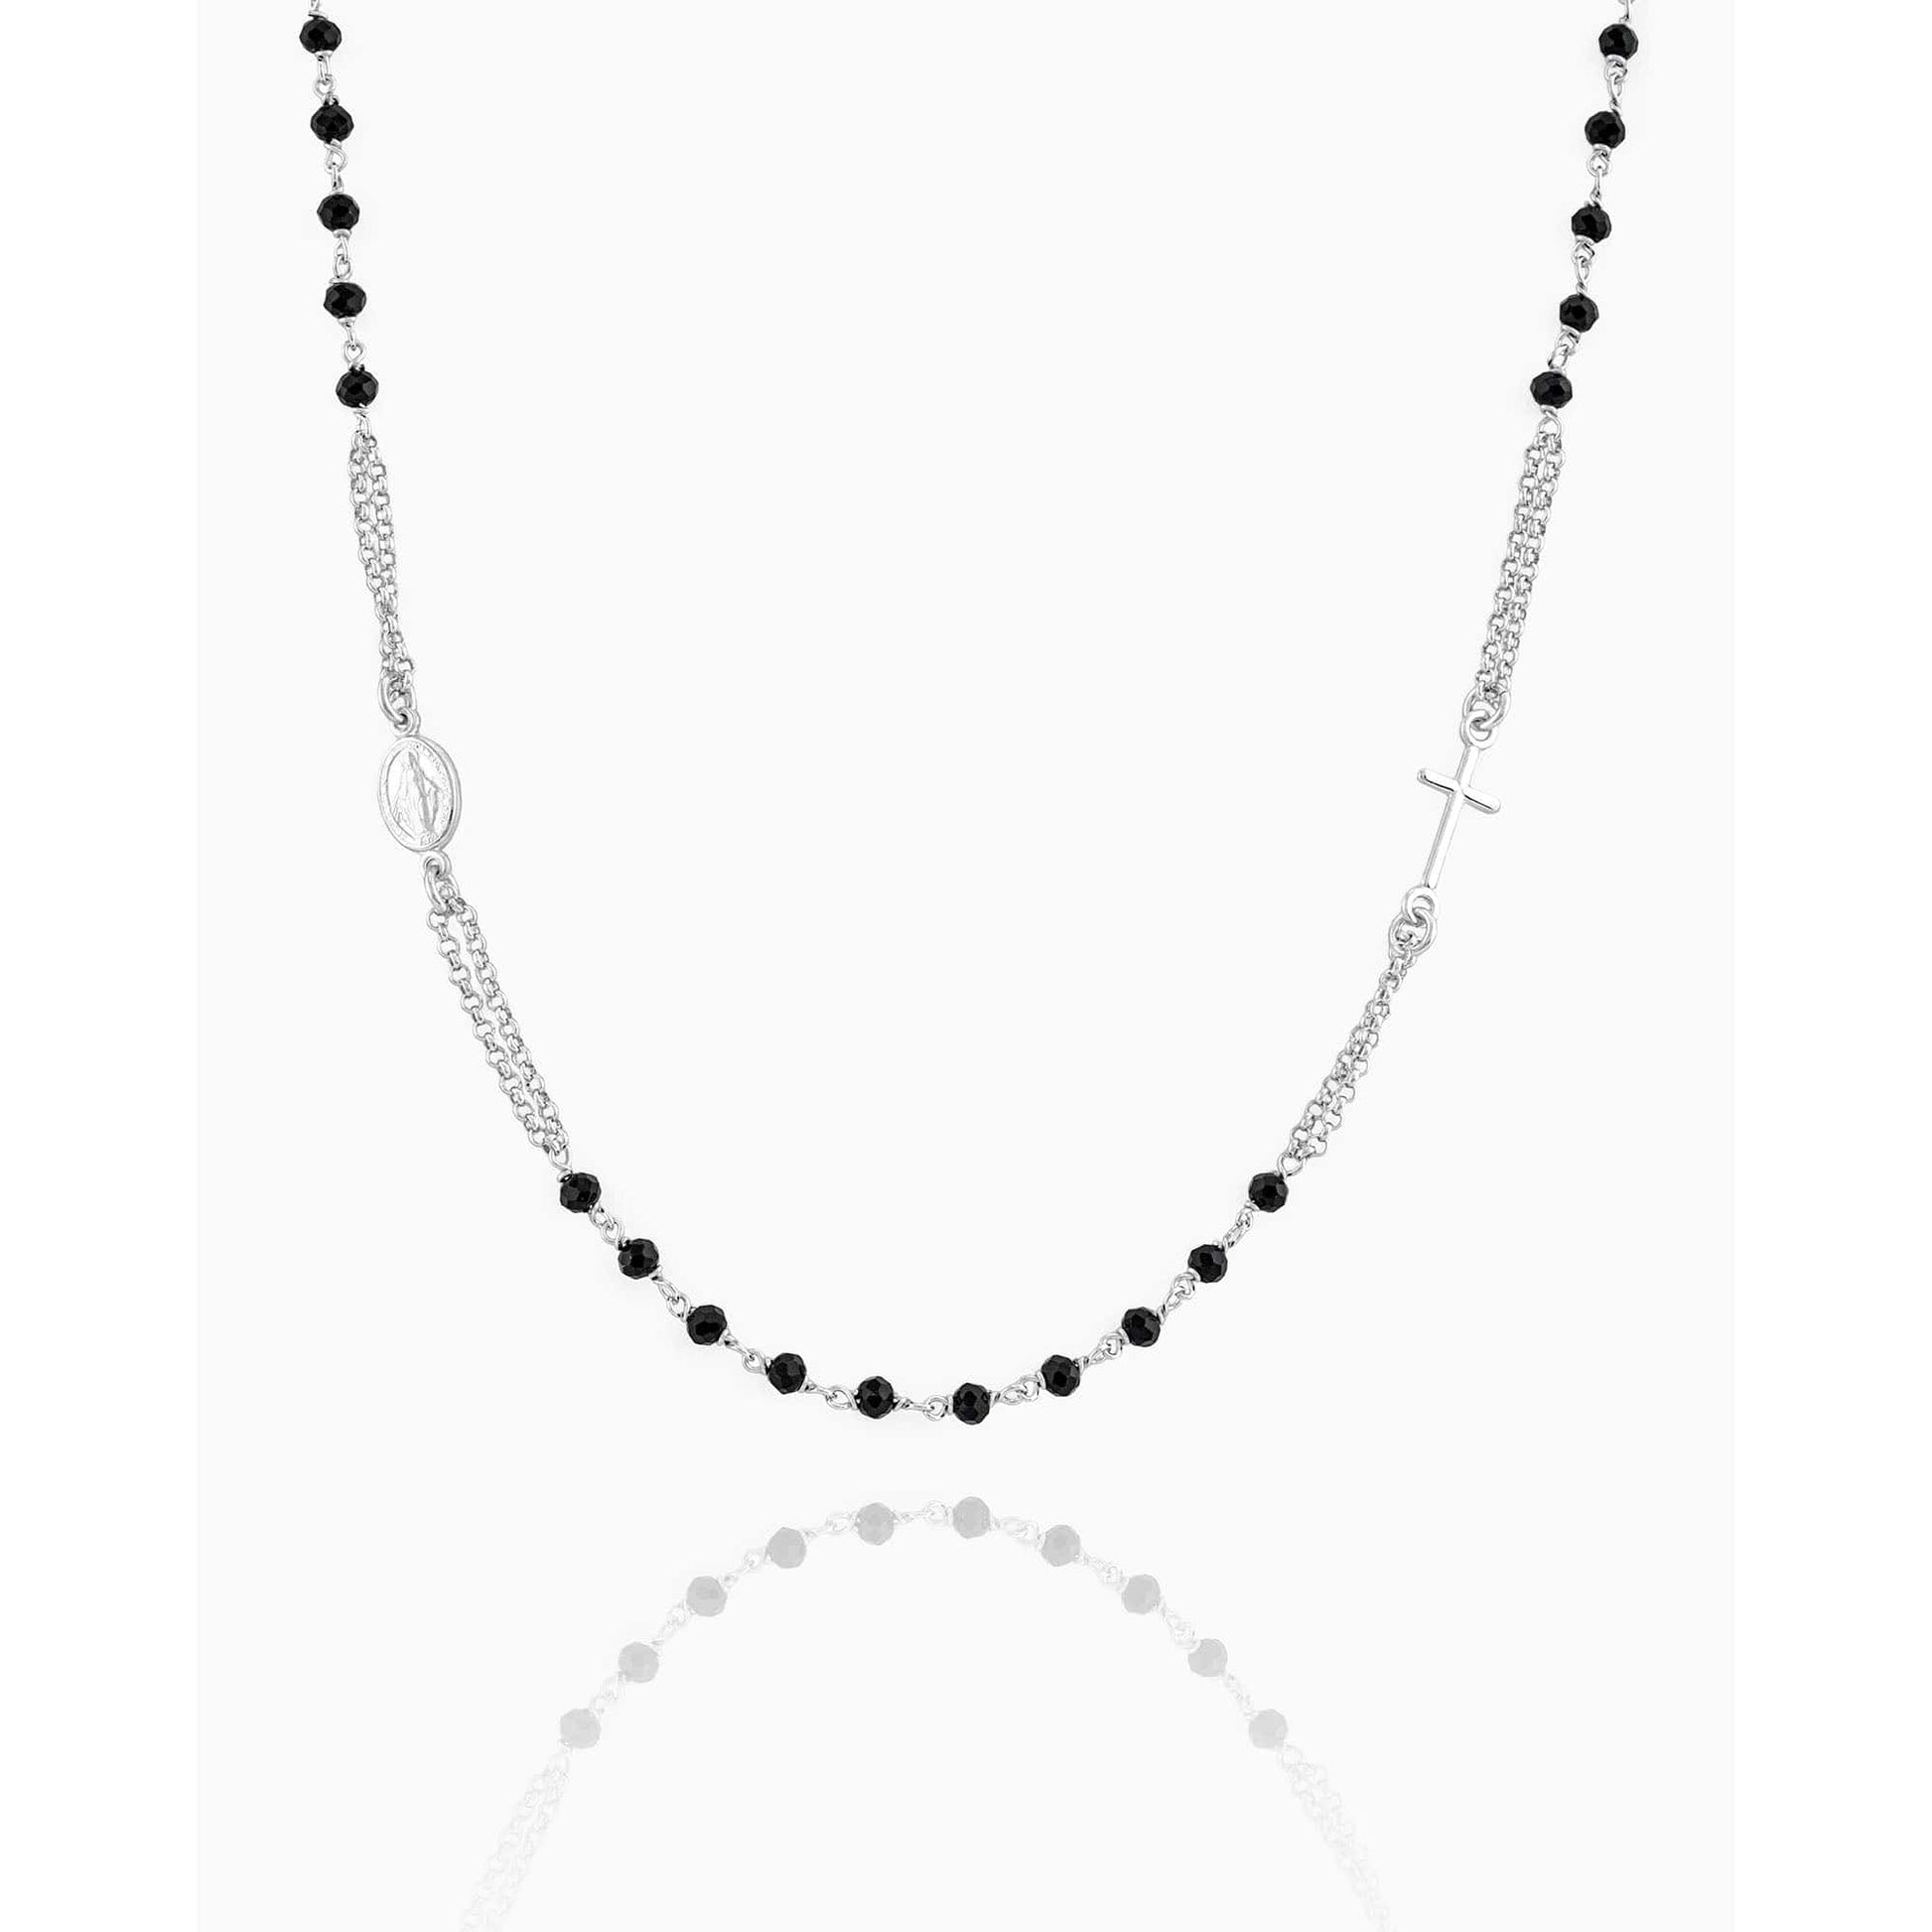 MONDO CATTOLICO Prayer Beads Rhodium / Cm 46 (18.1 in) STERLING SILVER PLATED 3 MM BLACK BEADS NECKLACE